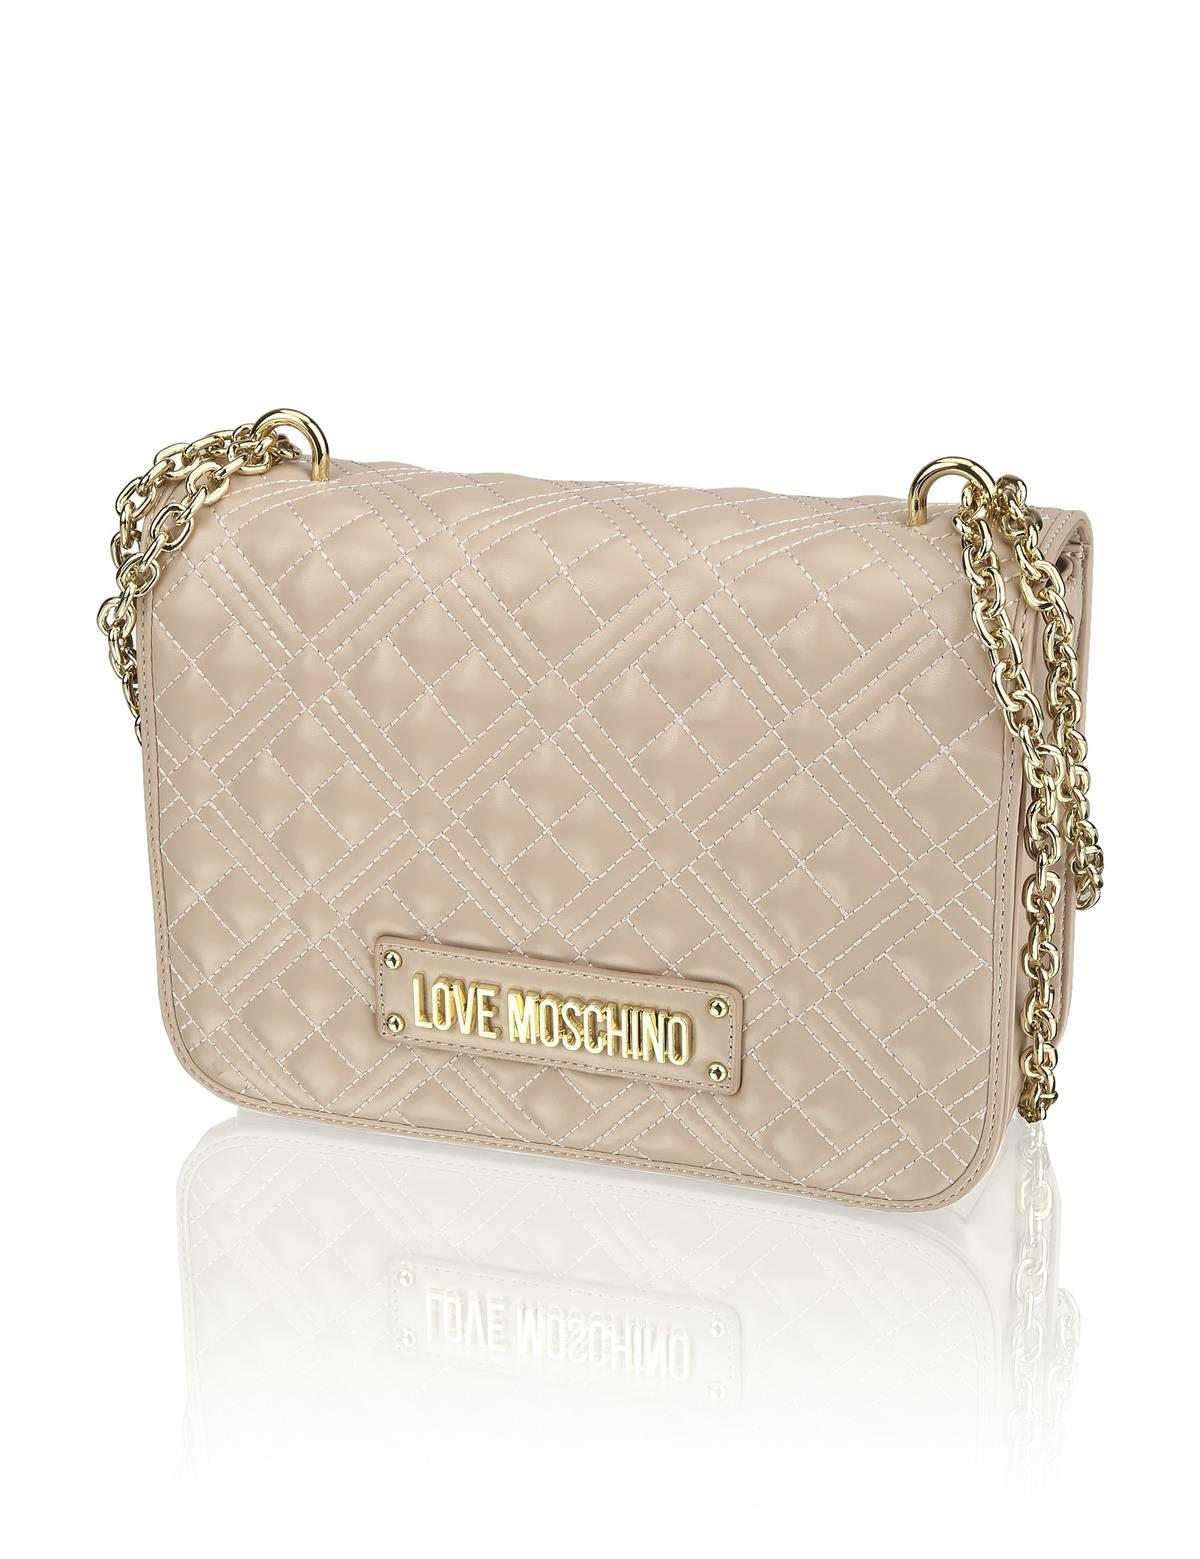 HUMANIC 15 Love Moschino Quilted Bag EUR 210 6131001827.jp